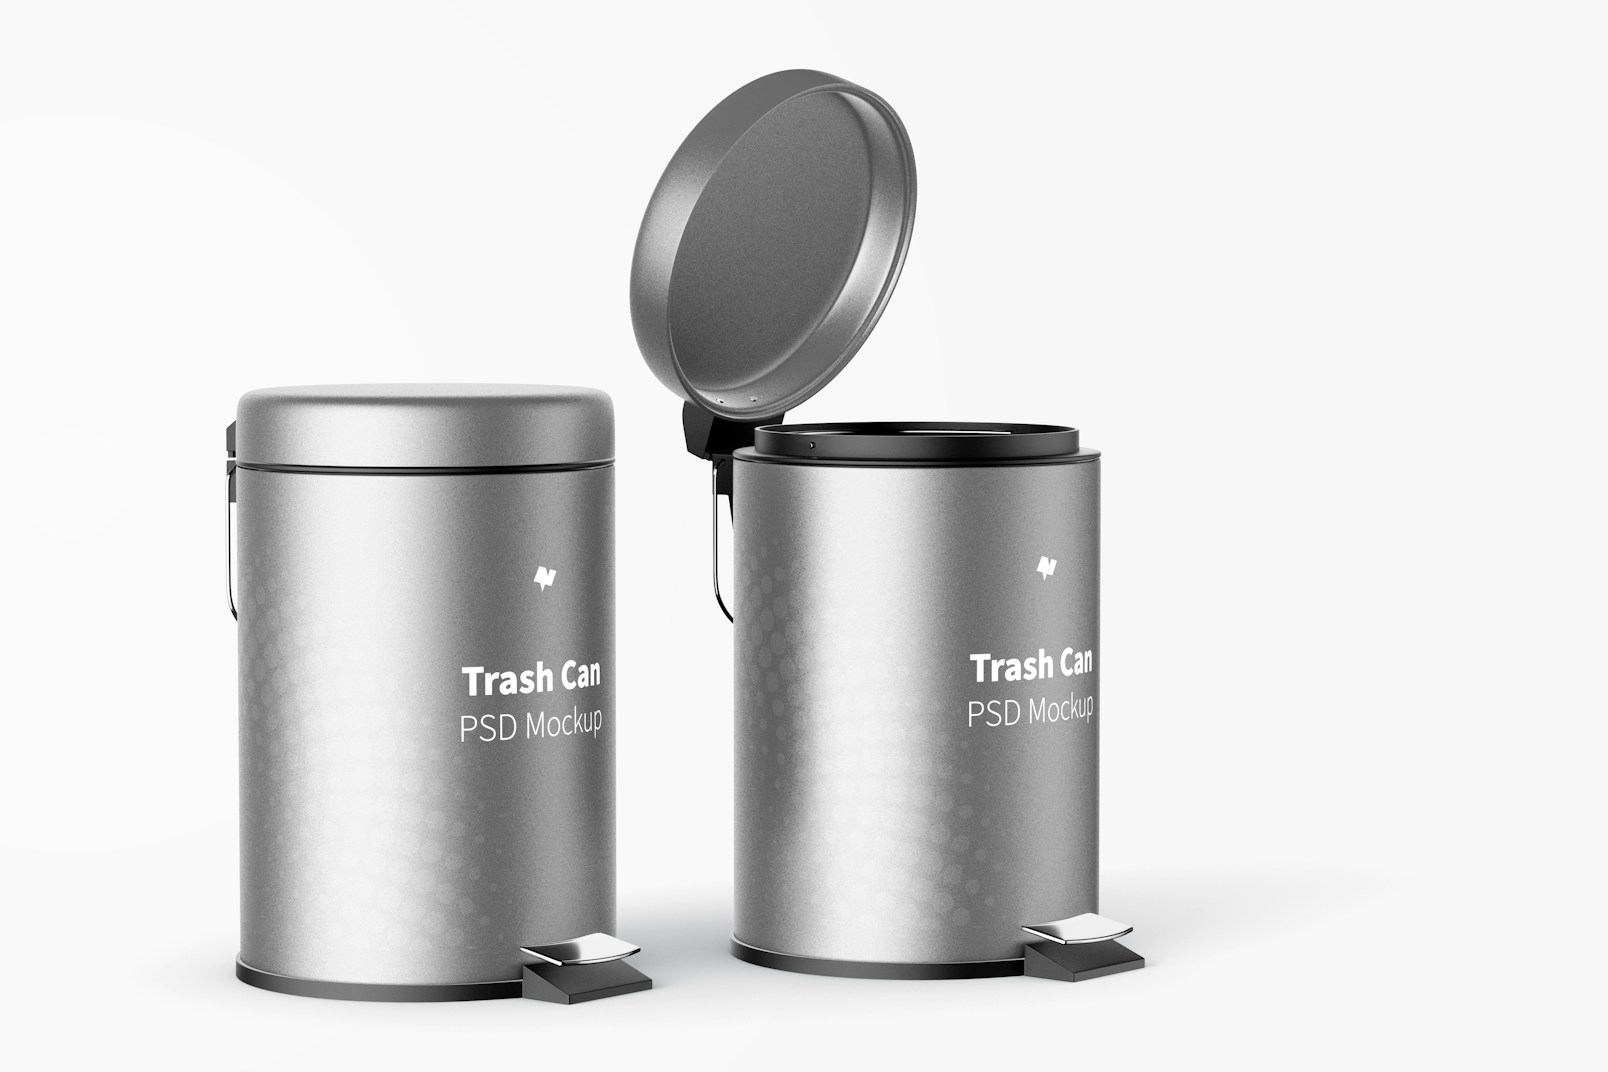 Trash Cans With Foot Pedal Mockup, Opened and Closed